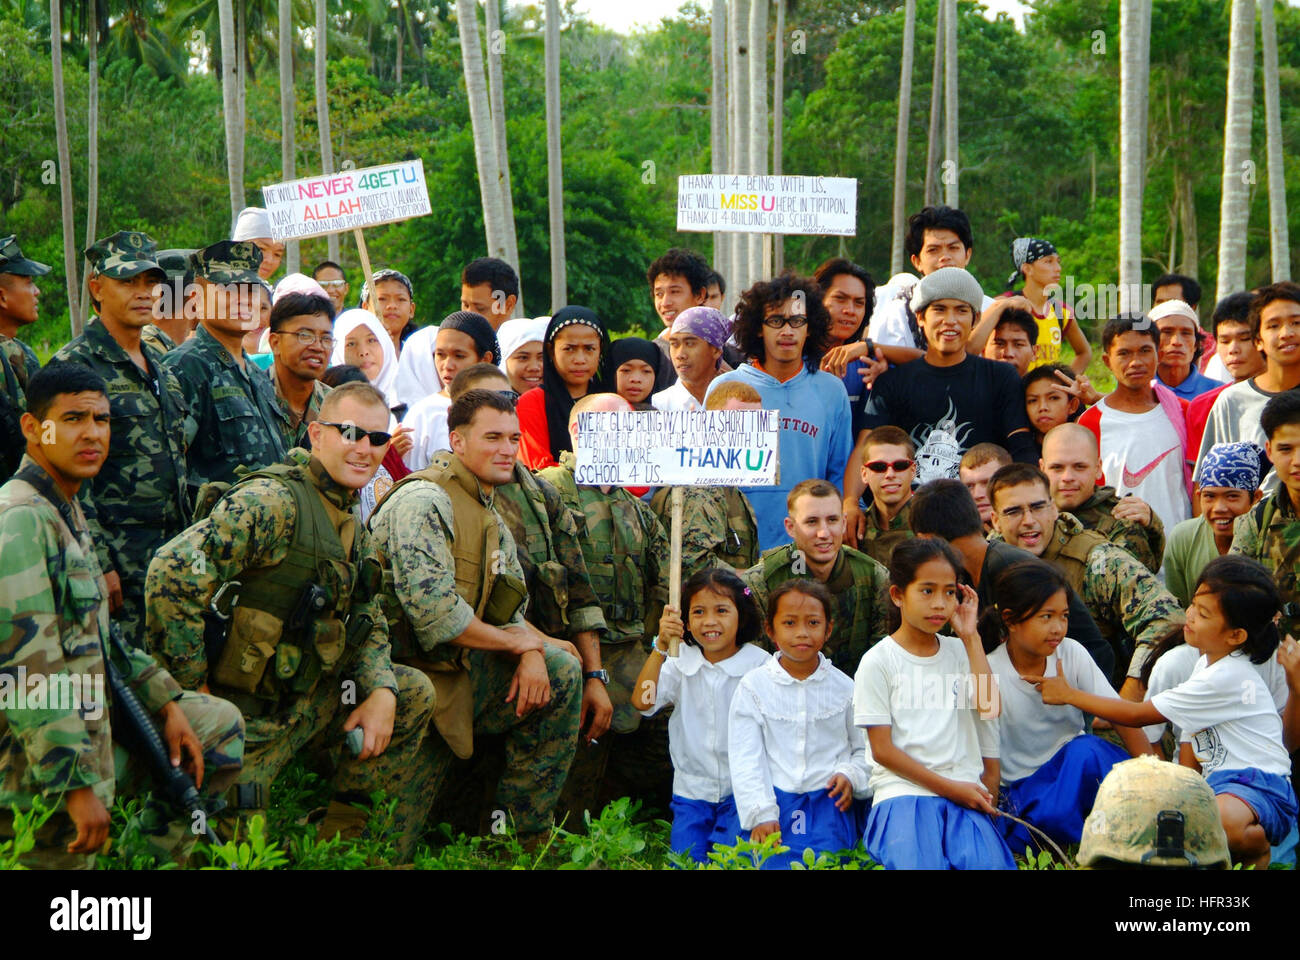 060303-N-4772B-128 Jolo, Philippines (March 3, 2006) - Philippine Marines and villagers from the nearby town of Tiptipon pose with U.S. Marines and Sailors assigned to the 31st Marine Service Support Group (MSSG) before they depart the island for transit back to the amphibious dock landing ship USS Harpers Ferry (LSD 49). The joint efforts of more than 500 AFP and U.S. medical, dental, engineer and protection personnel were able to bring medical and dental support to more than 11,000 Filipino people and 504 animals, along with building four elementary schools. Harpers Ferry and Elements of the Stock Photo